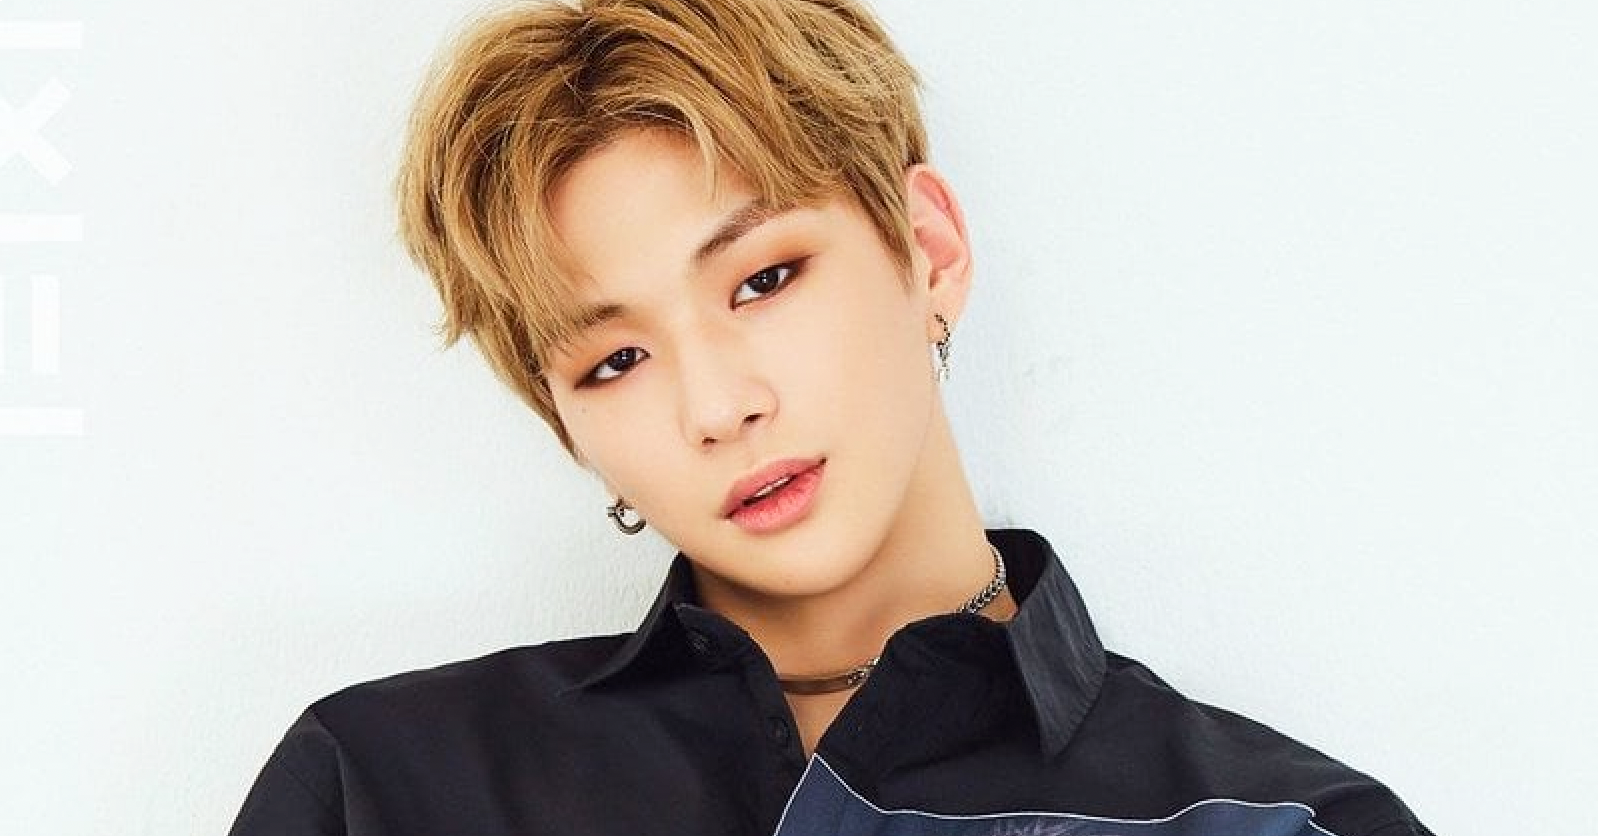 Check Out The Net Worth of Kang Daniel - How Wealthy is He?